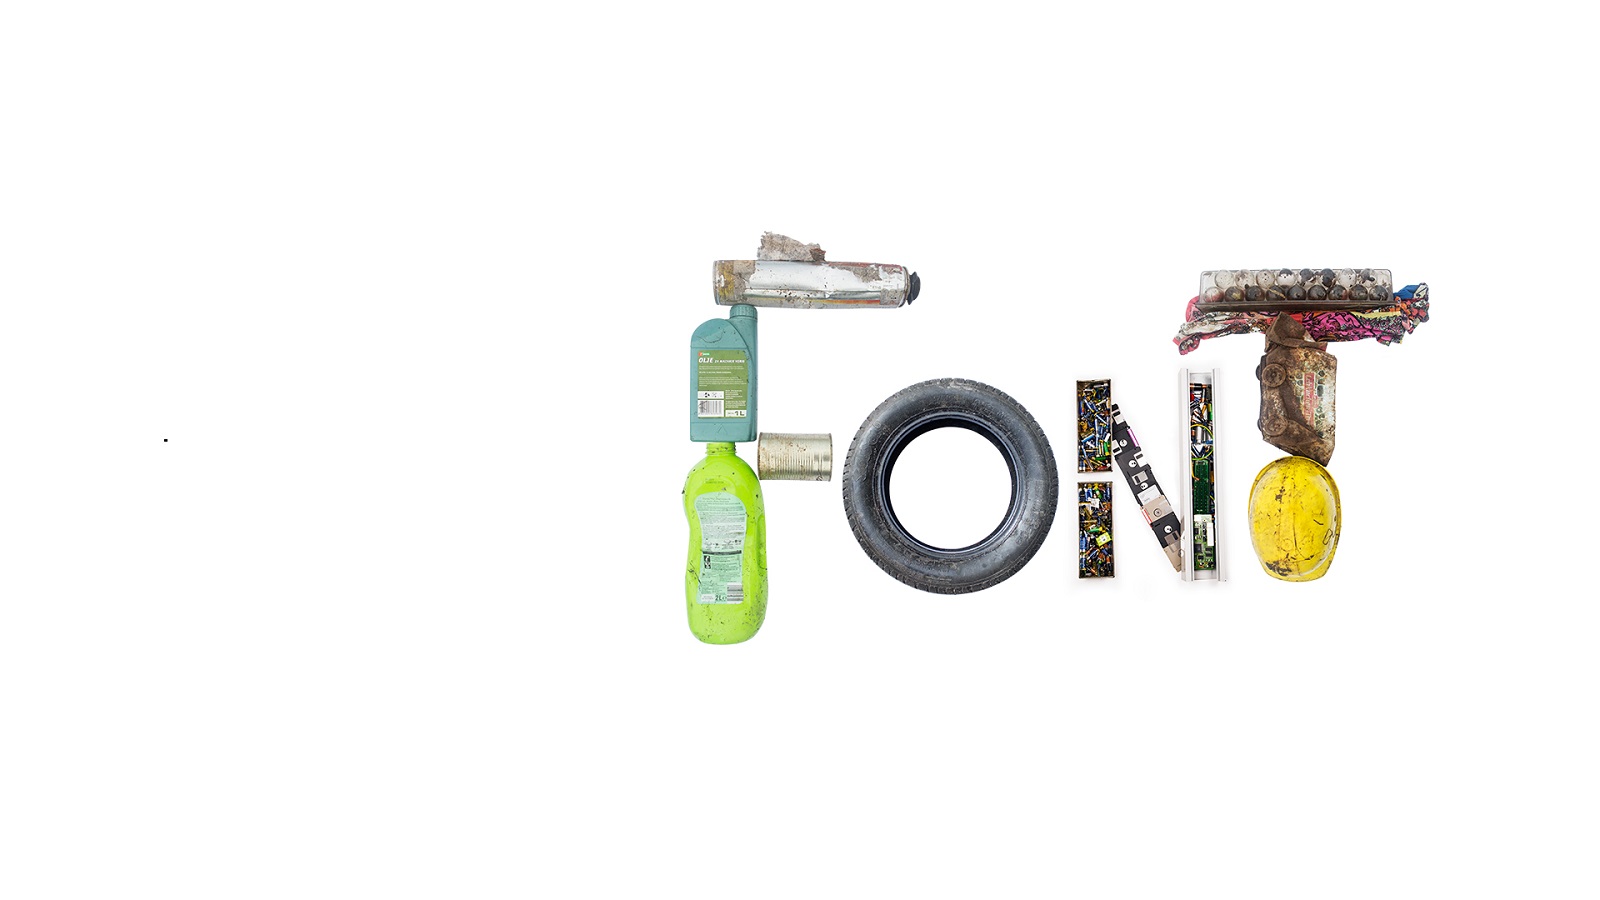 Watch Trash in Slovenia Morphing into Artistic Typeface